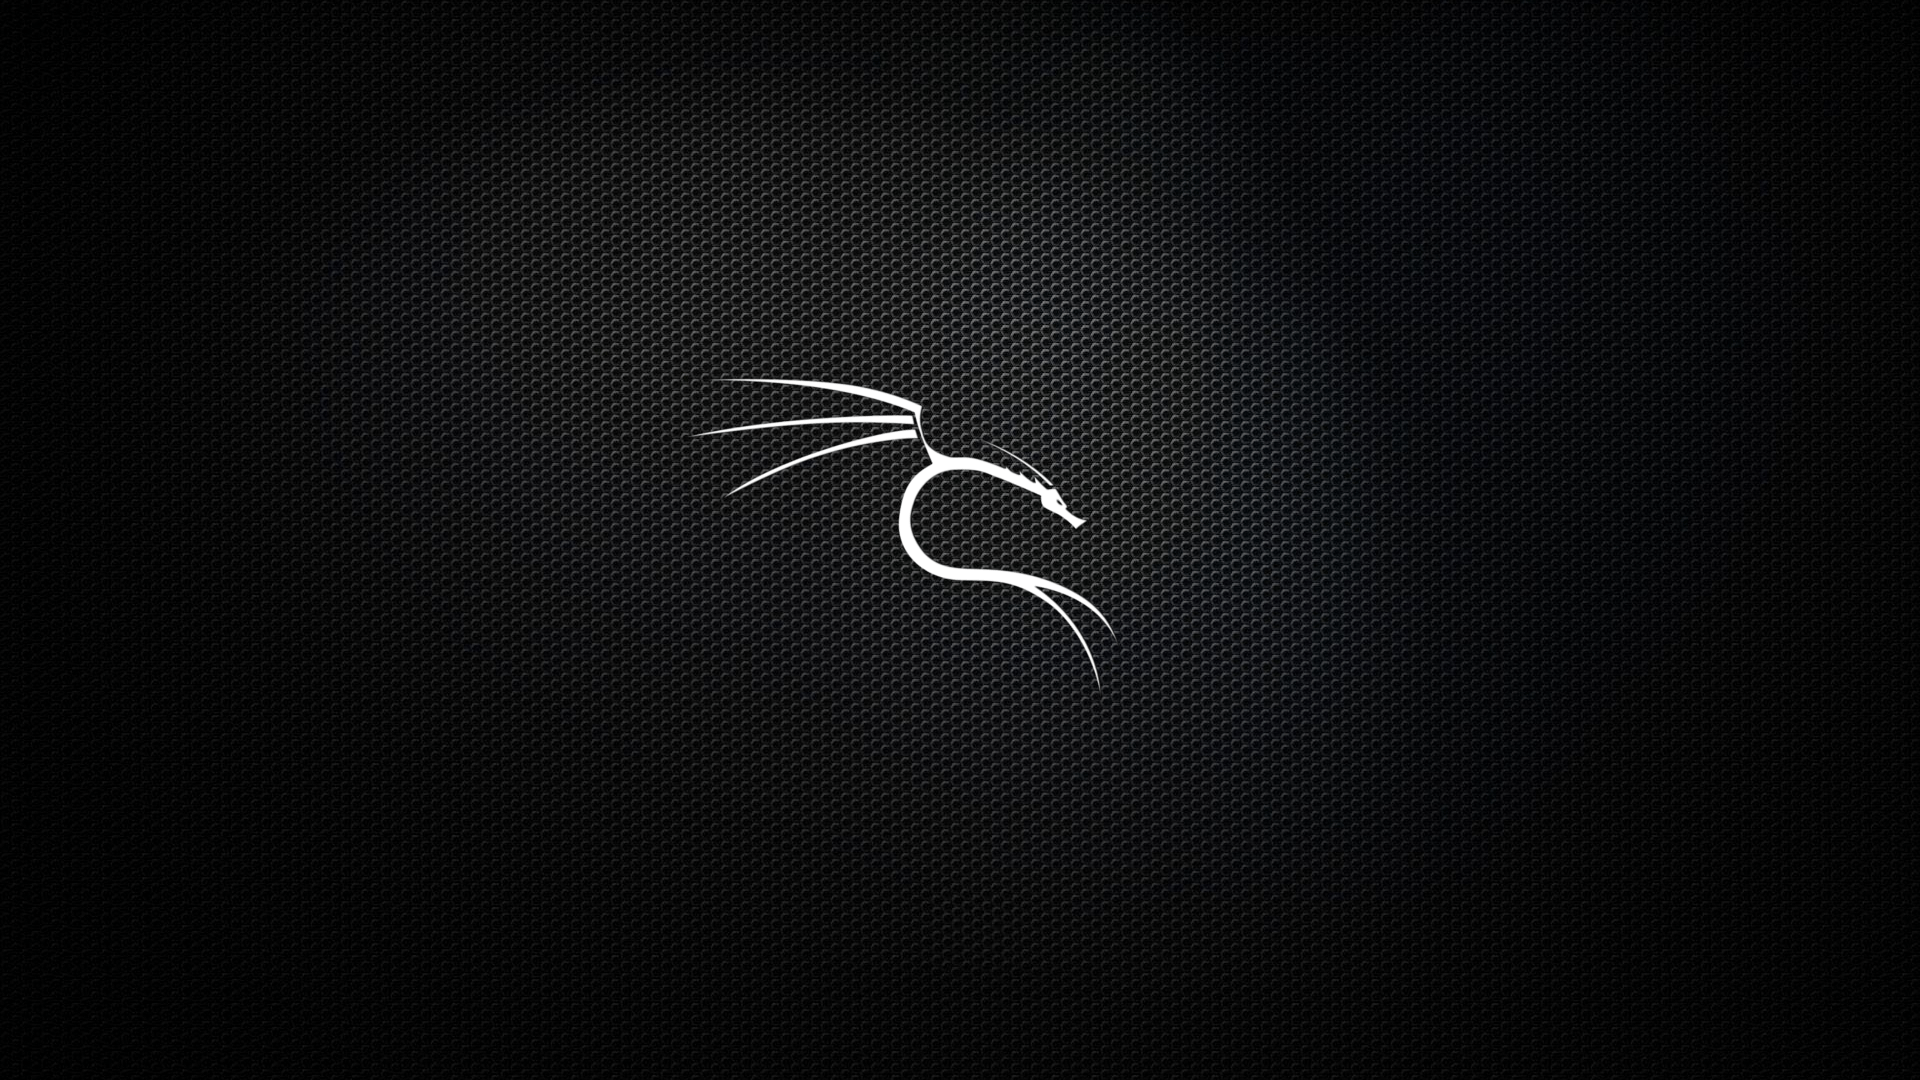 GitHub Kali Linux Wallpaper: A Set Of Dedicated Kali Linux* Wallpaper Which I'm Going To Update Regularly. They All Done Using GIMP And Other GNU Linux FOSS